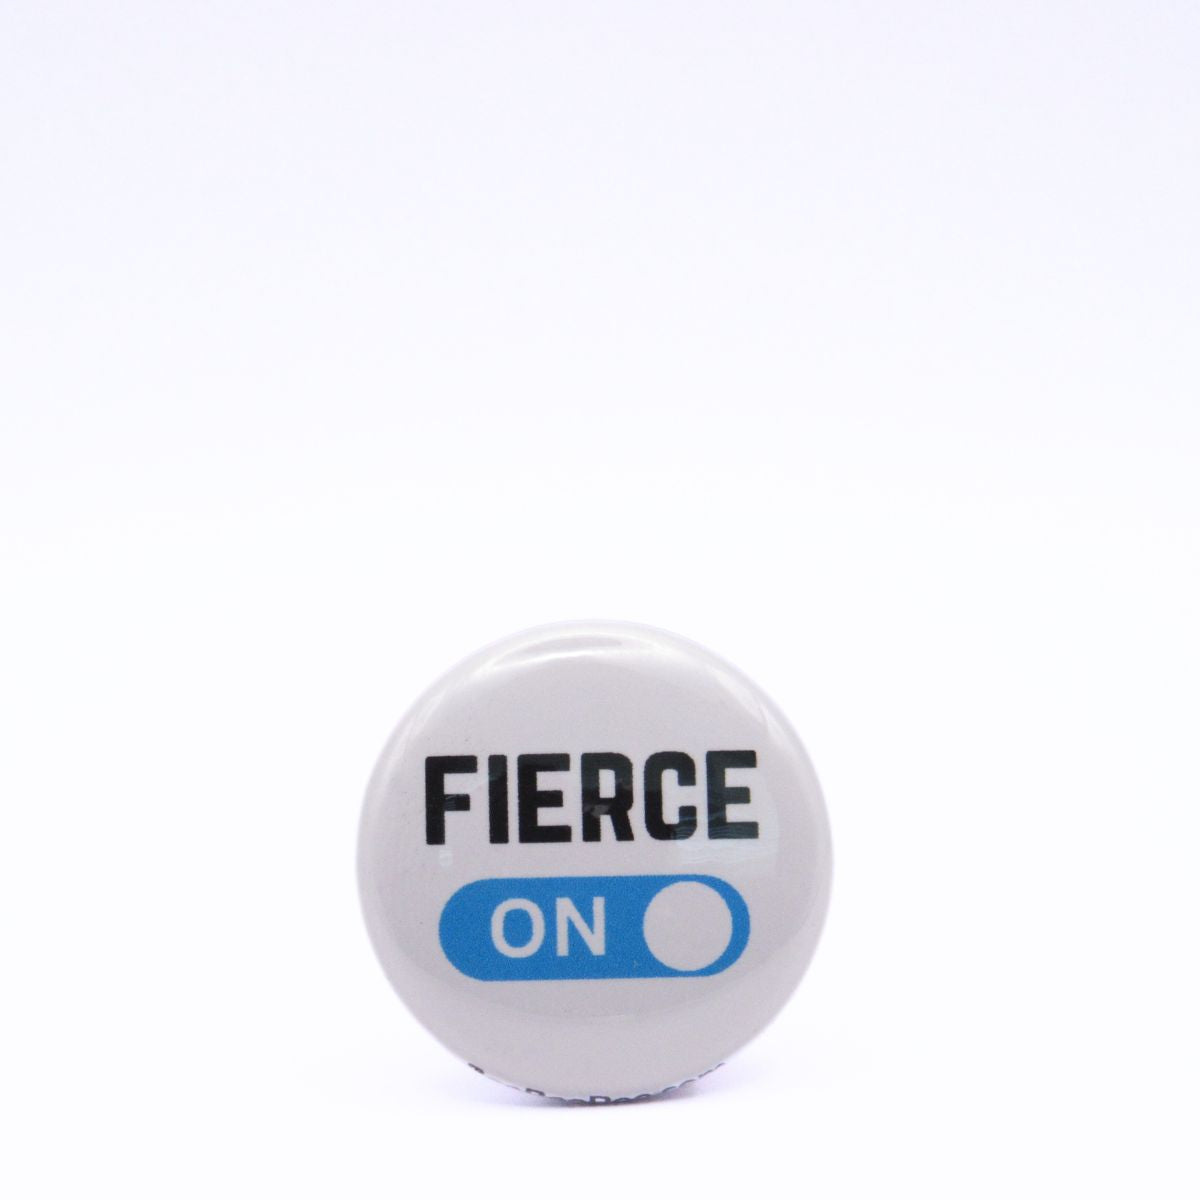 BooBooRoo Pinback Button (i.e. button, badge, pin) displaying fierce mode is on. Blue background for mode indicator.